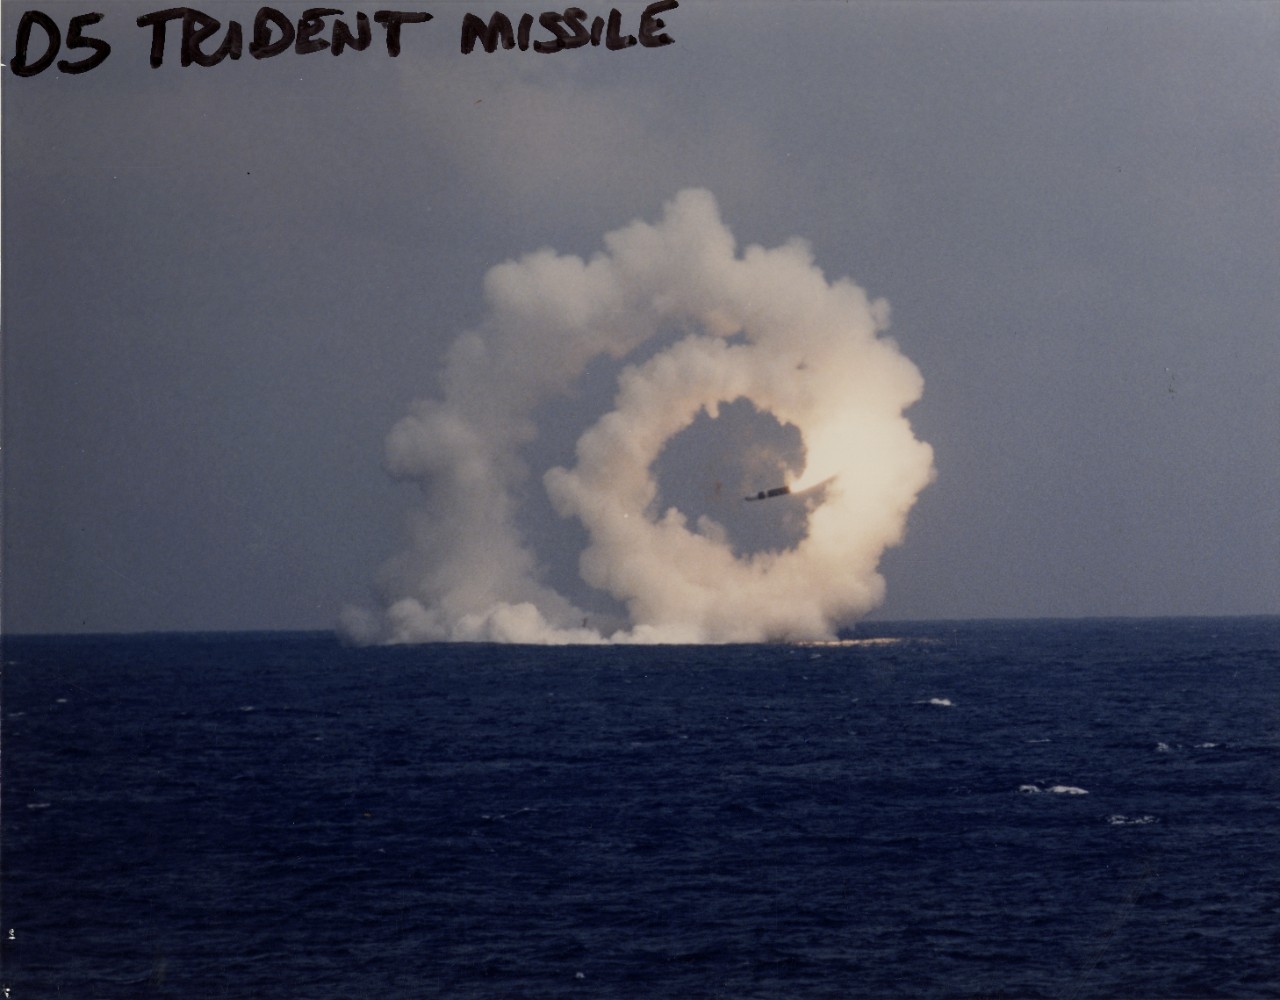 Faulty missile leaves a spiral cloud over the sea